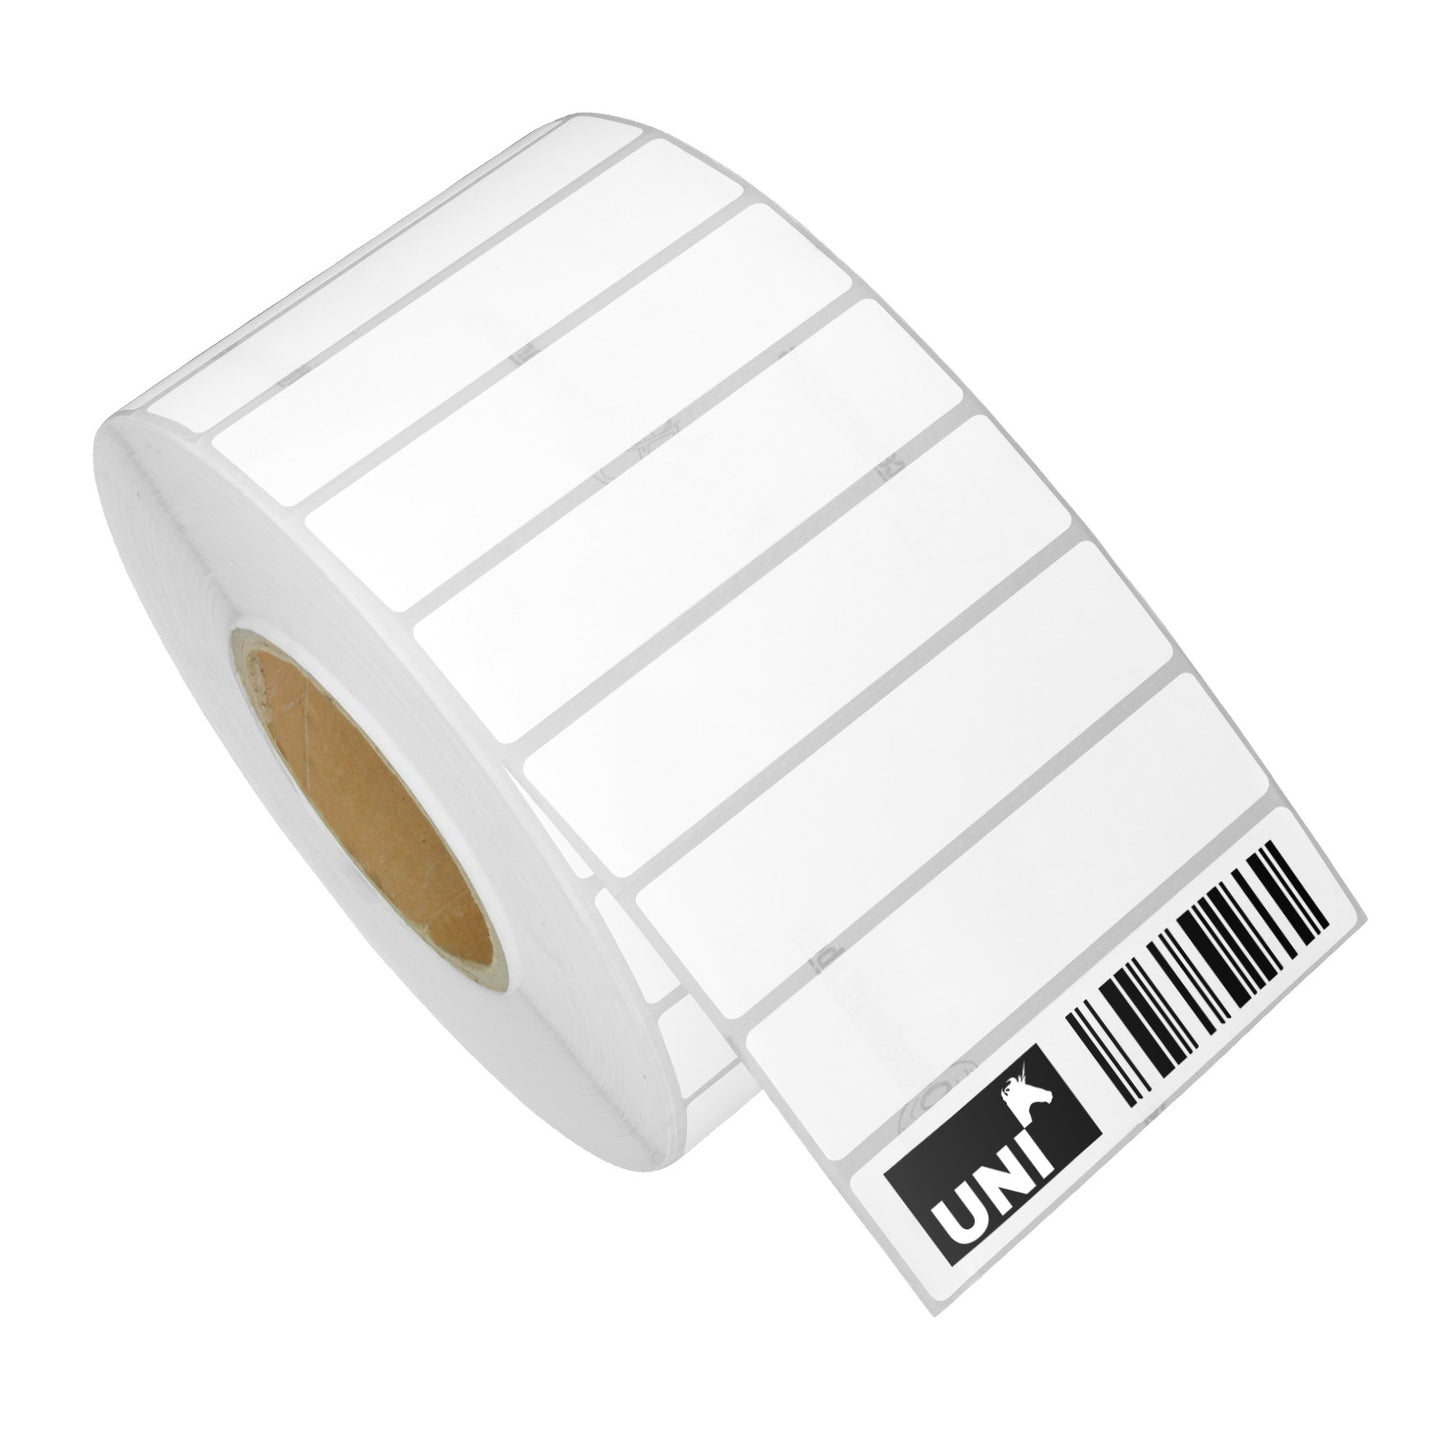 4 x 1 inch | Blank Direct Thermal Labels (3 inch Core)